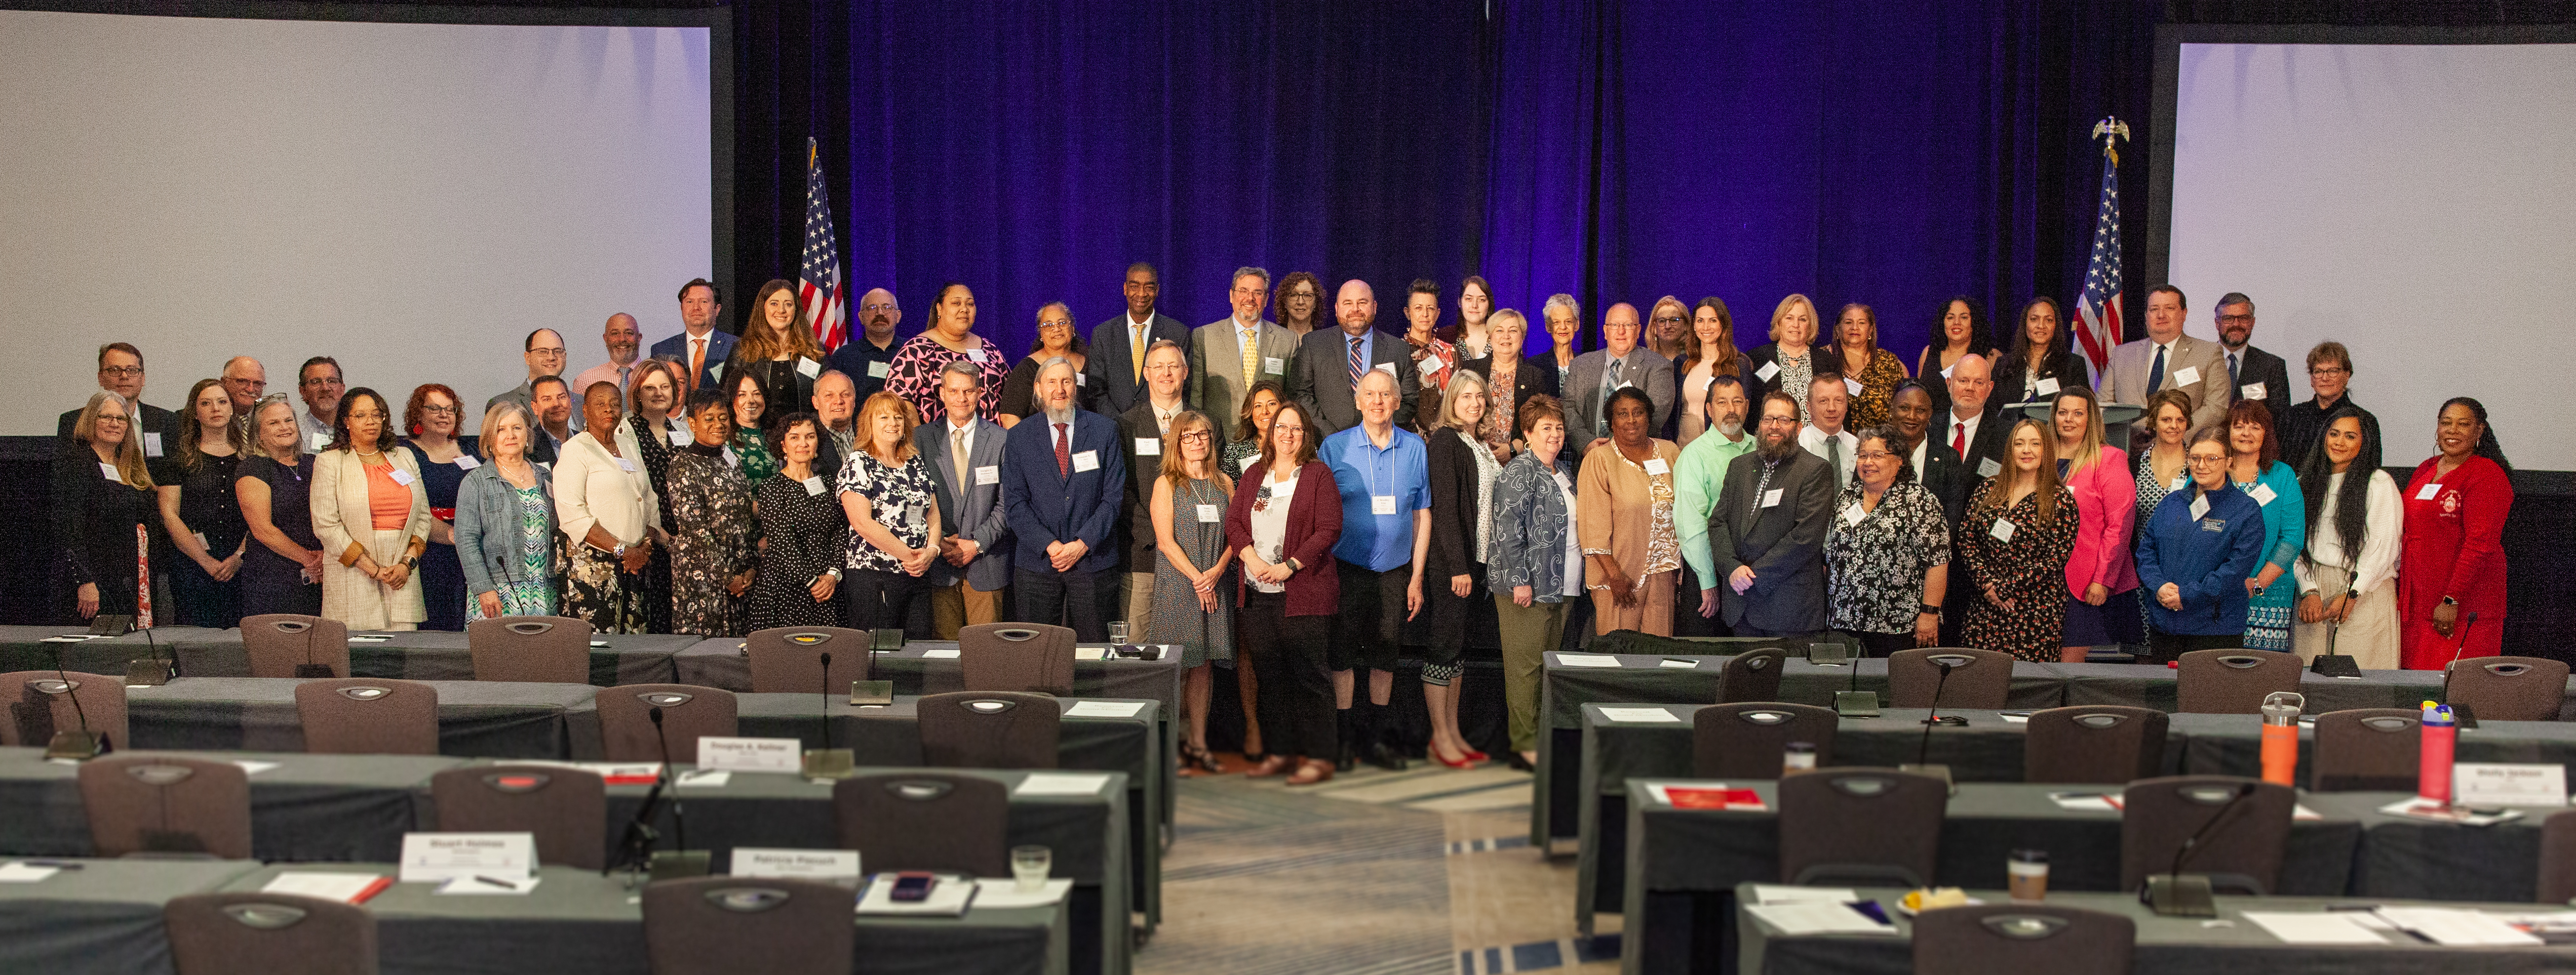 Group Photo Taken of Standards Board Members at the 2023 EAC Standards Board Annual Meeting held in person in Phoenix, AZ. (April 18-19, 2023).